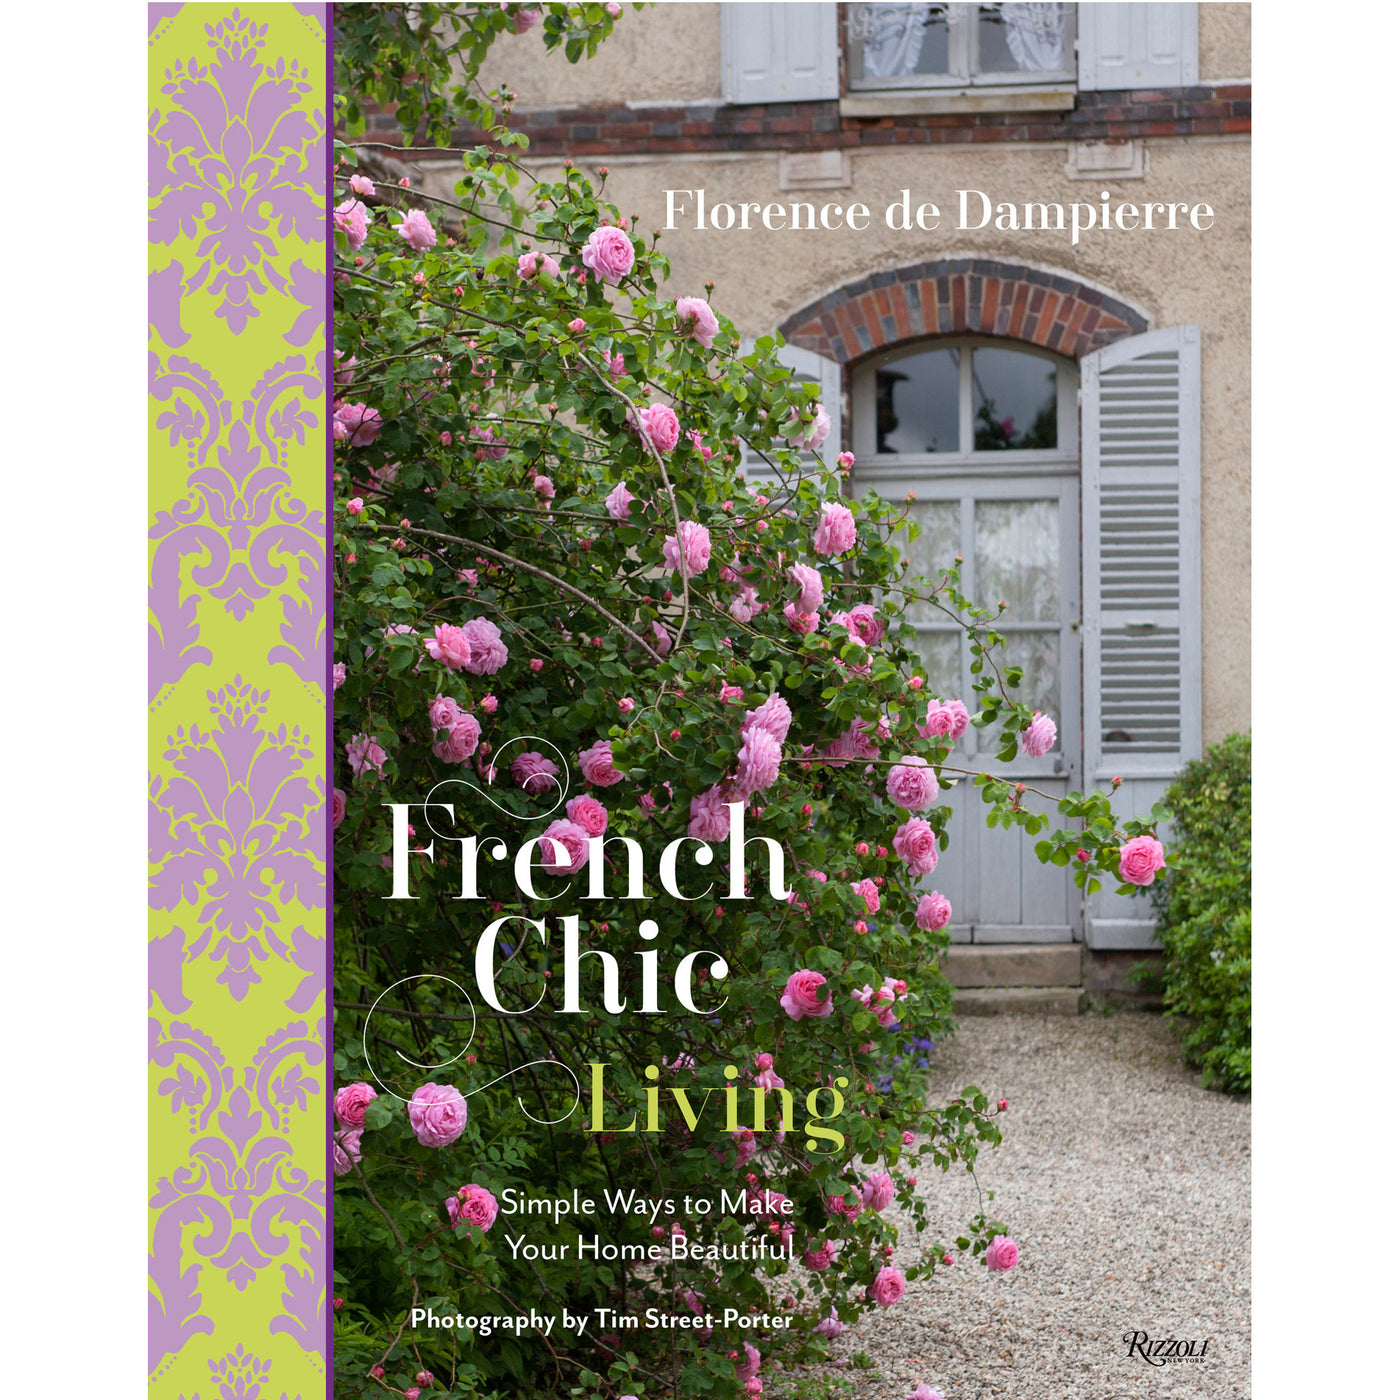 French Chic Living: Simple Ways to Make Your Home Beautiful - Coffee Table Book - Villa Decor Design & Style